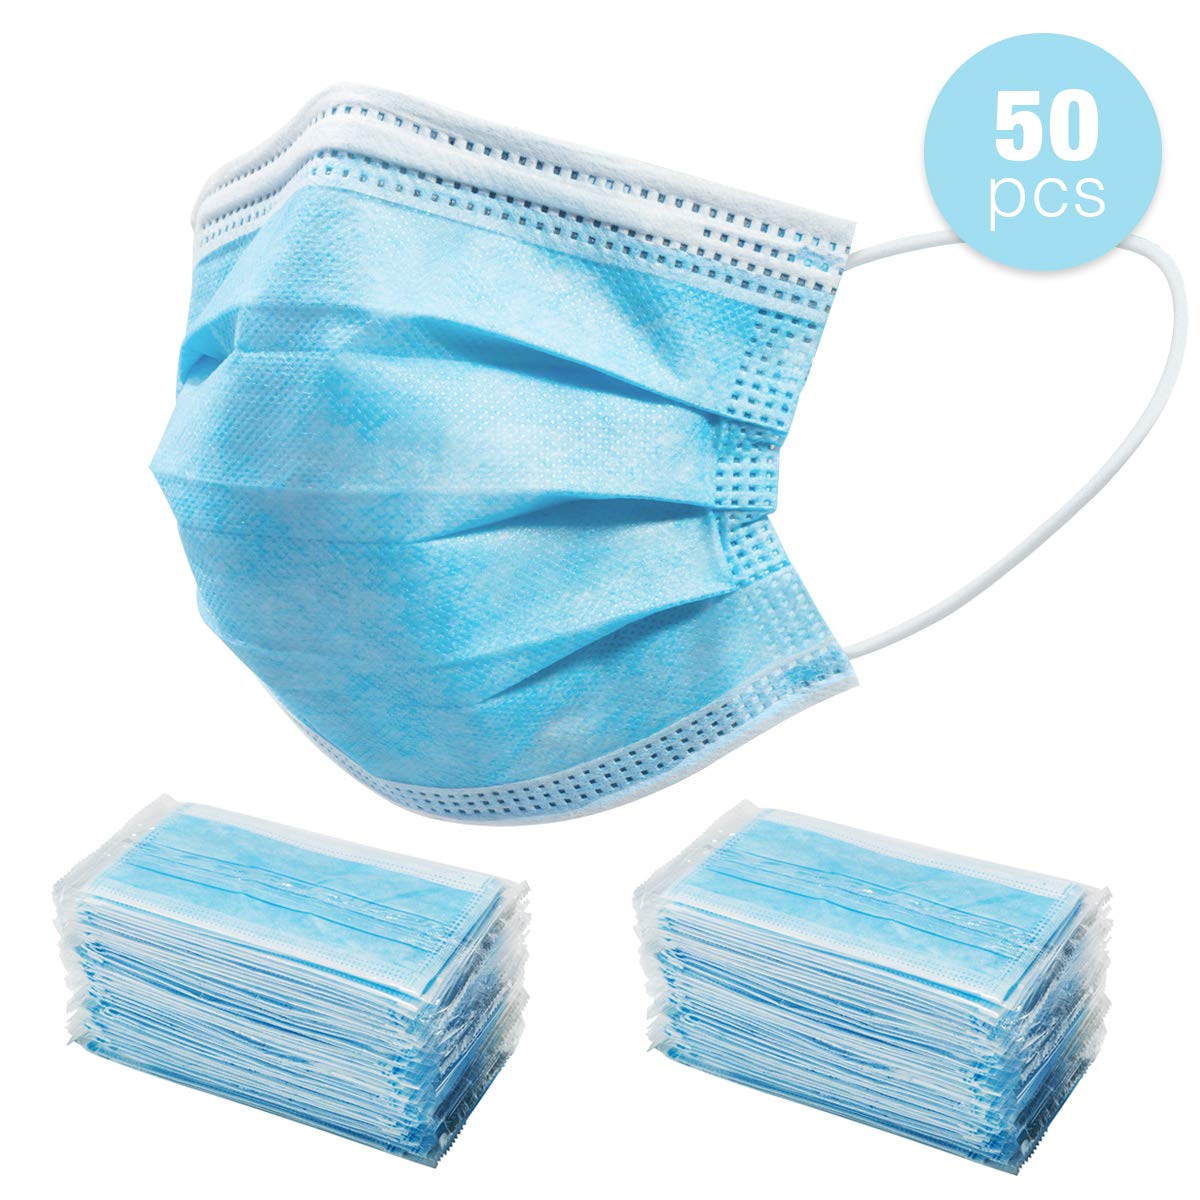 Disposable Face Masks 3 Ply Non Woven Fabric Soft And Comfortable Safety Hefei Haoxin Protective